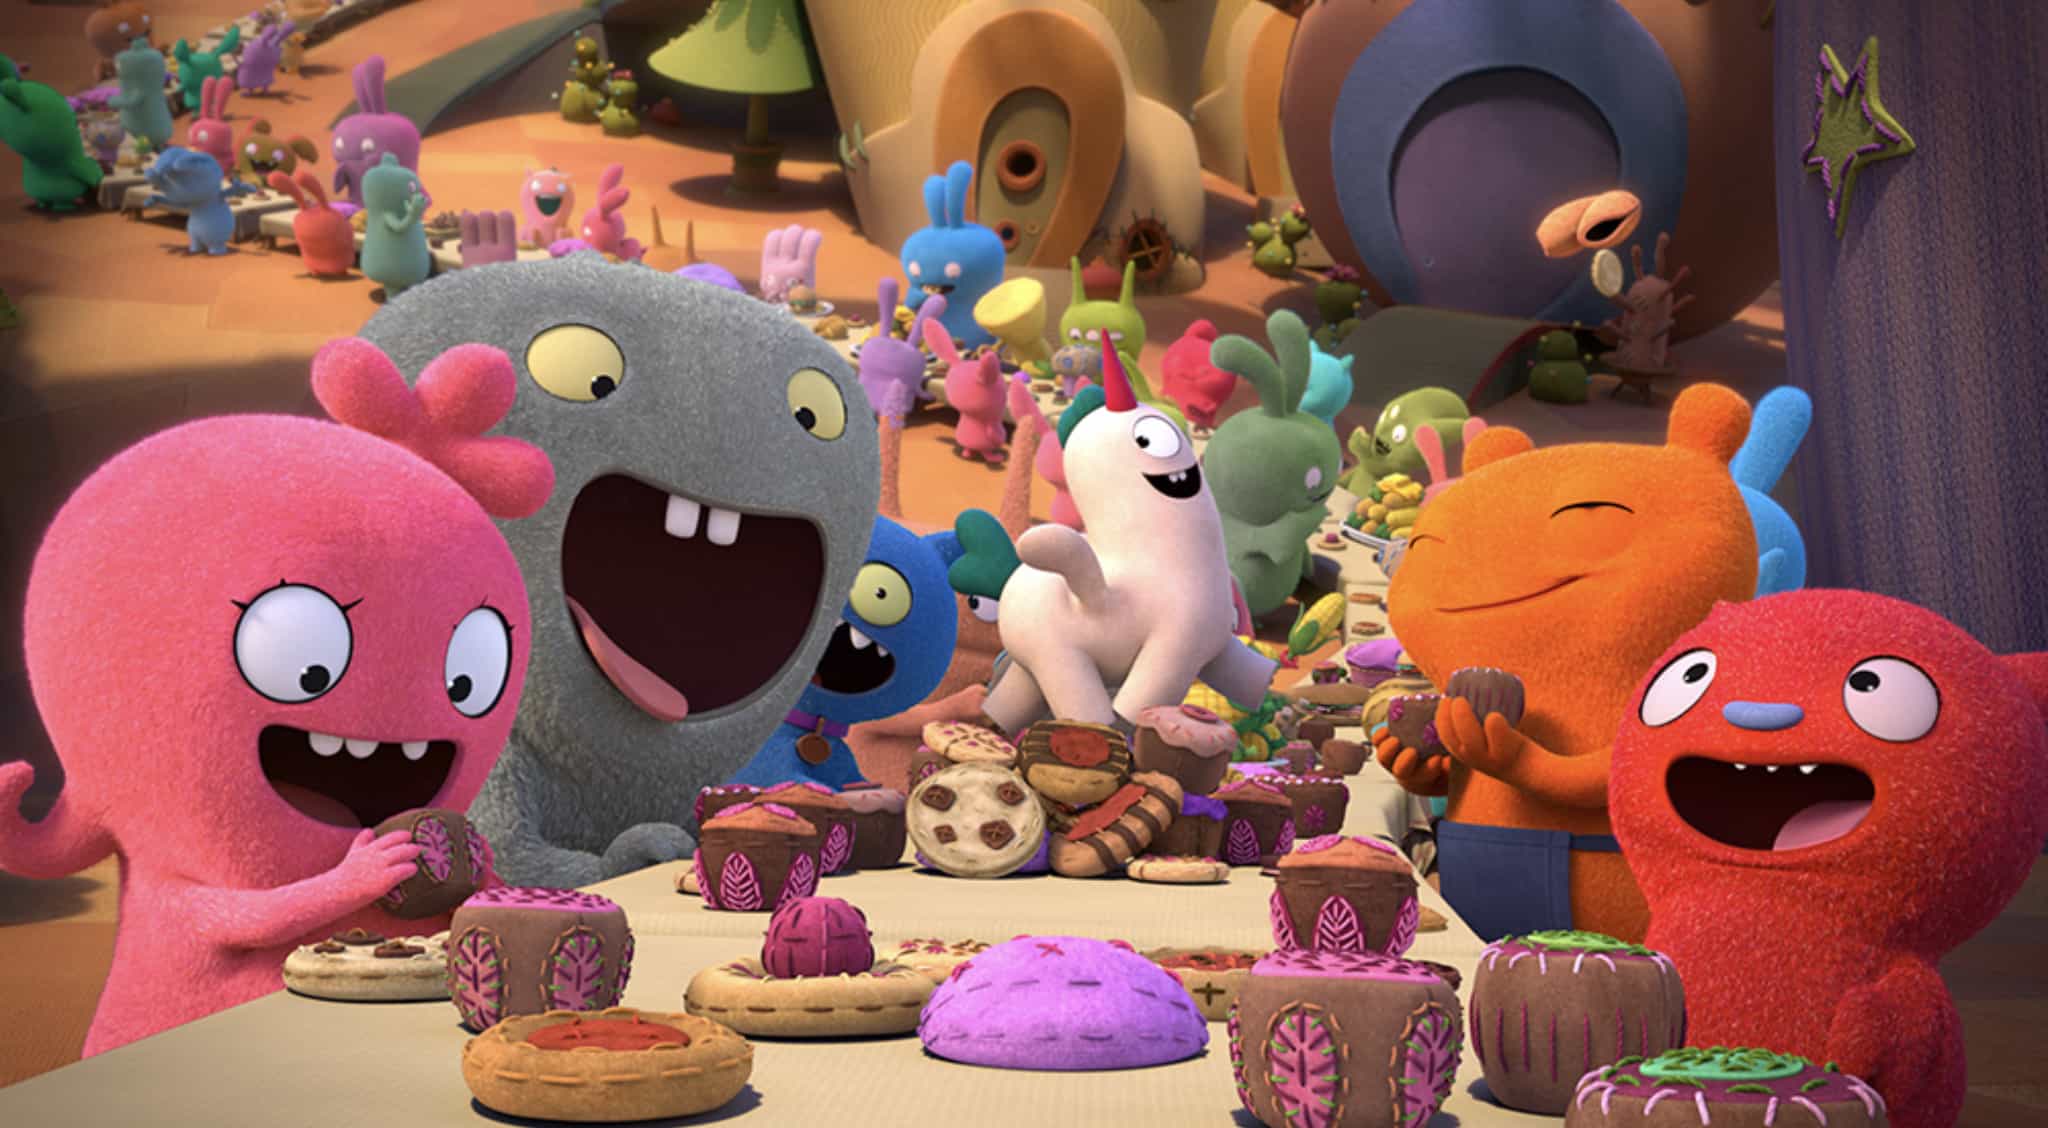 Is UglyDolls a good movie? Should parents take their children?